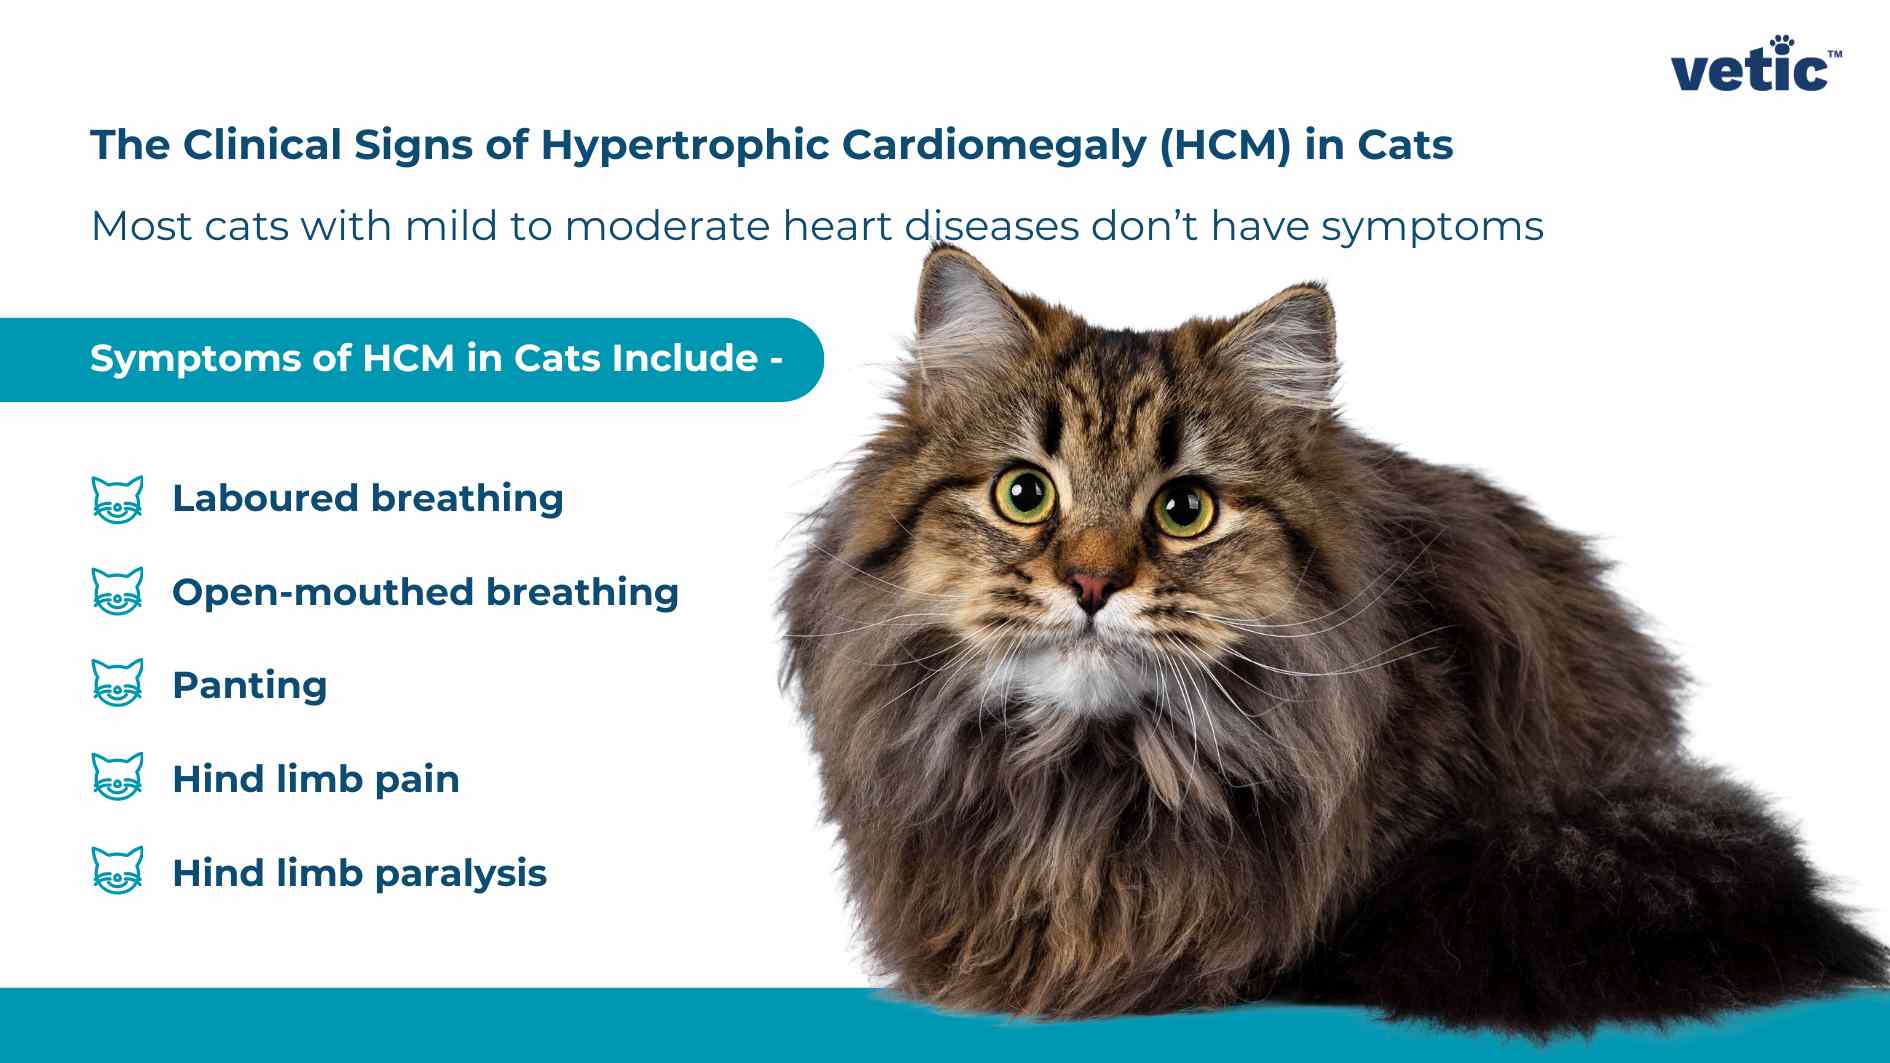 An informational image about Hypertrophic Cardiomegaly in cats featuring a fluffy cat and a list of symptoms. The image is an informational graphic about “The Clinical Signs of Hypertrophic Cardiomegaly or HCM in Cats” by vetic. A fluffy, long-haired cat with green eyes is prominently featured on the right side of the image. The background is a gradient from blue at the top to white at the bottom. At the top, there’s text stating that most cats with mild to moderate heart diseases don’t have symptoms. Below this, there’s a list of symptoms of HCM in cats, including labored breathing, panting, hind limb pain, and hind limb paralysis. Each symptom is accompanied by an icon of a cat’s face.